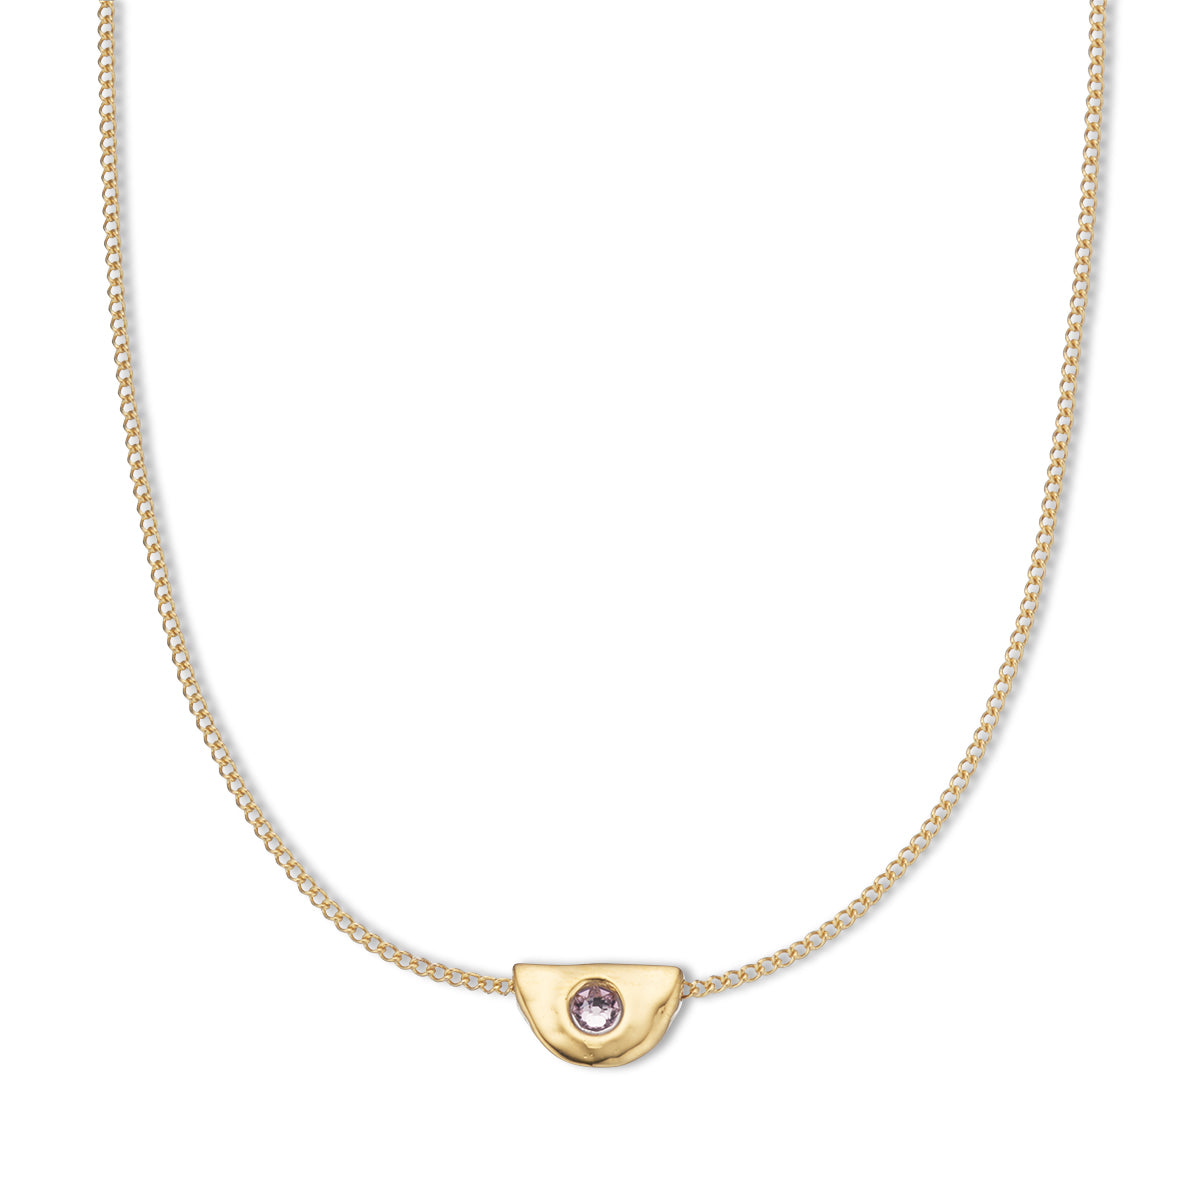 June Alexandrite birthstone necklace 18k gold plated